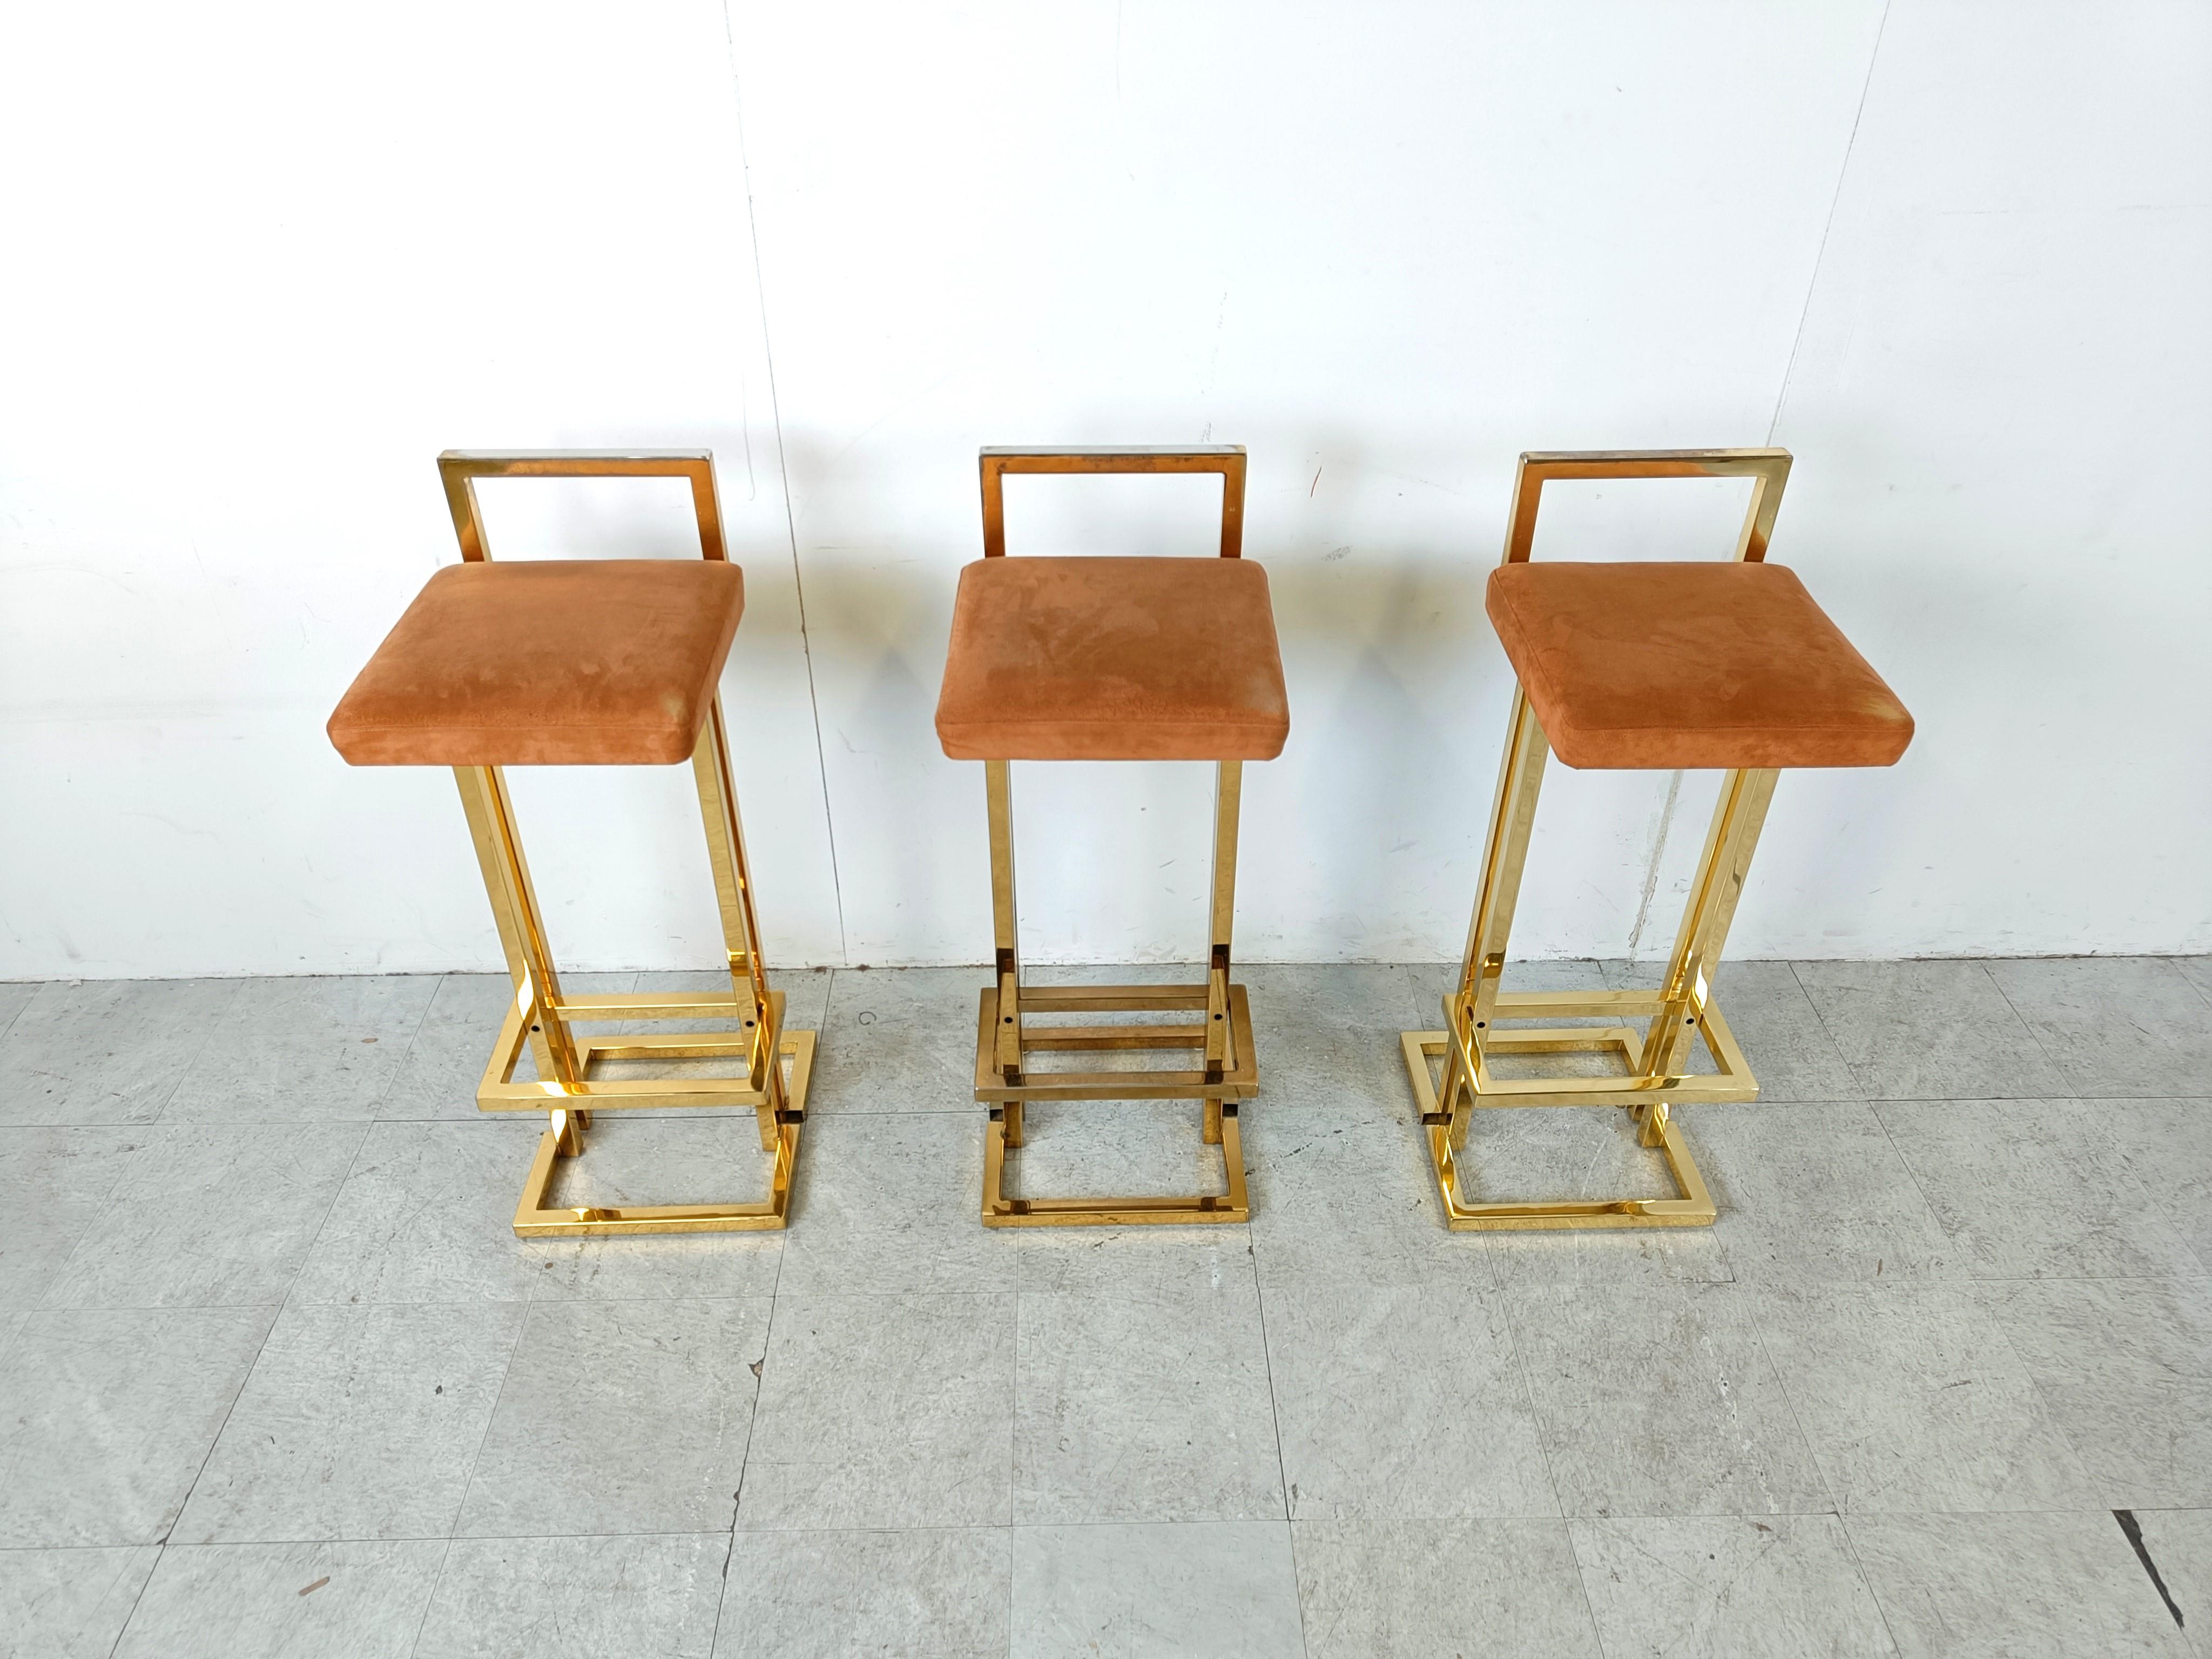 Beautiful original brass and suede bar stools by Belgochrom.

Beautiful timeless design with a luxury appeal.

They have their original brown suede upholstery which mixes well with the brass frame.

Good overall condition. Upholstery is very good,